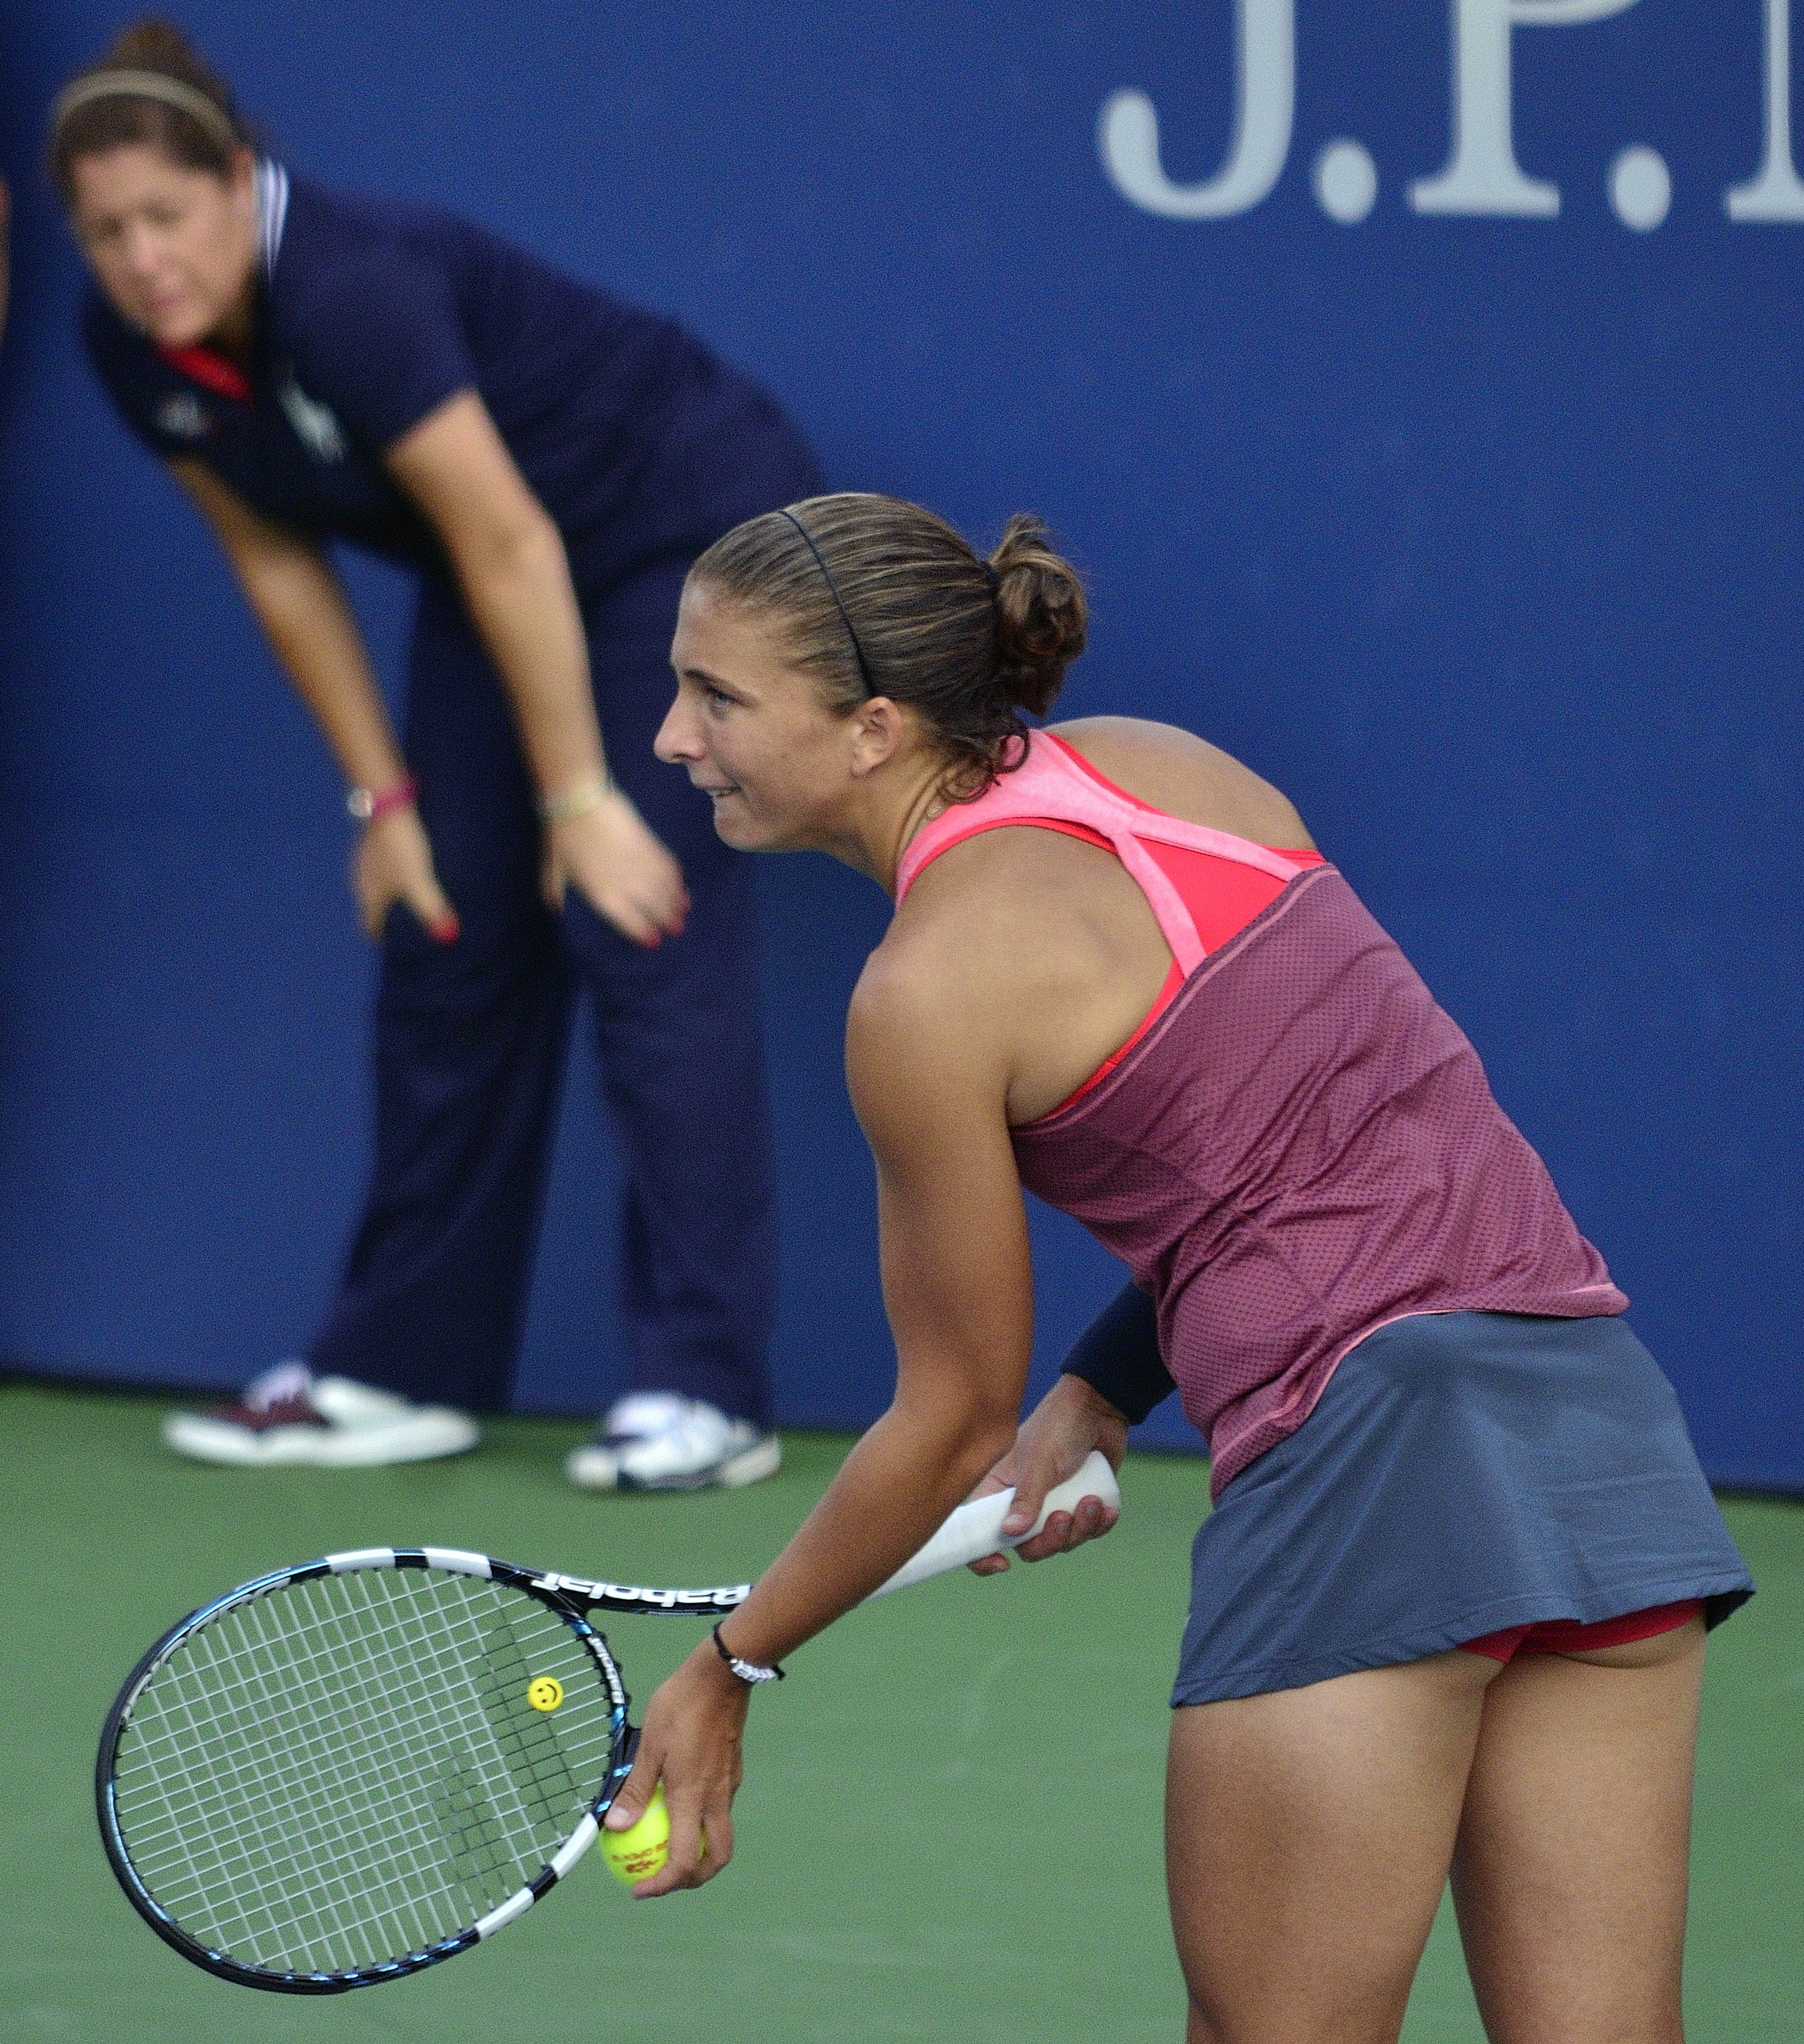 tennis-caught-wta-tennis-player-photo-of-the-day-january-15a